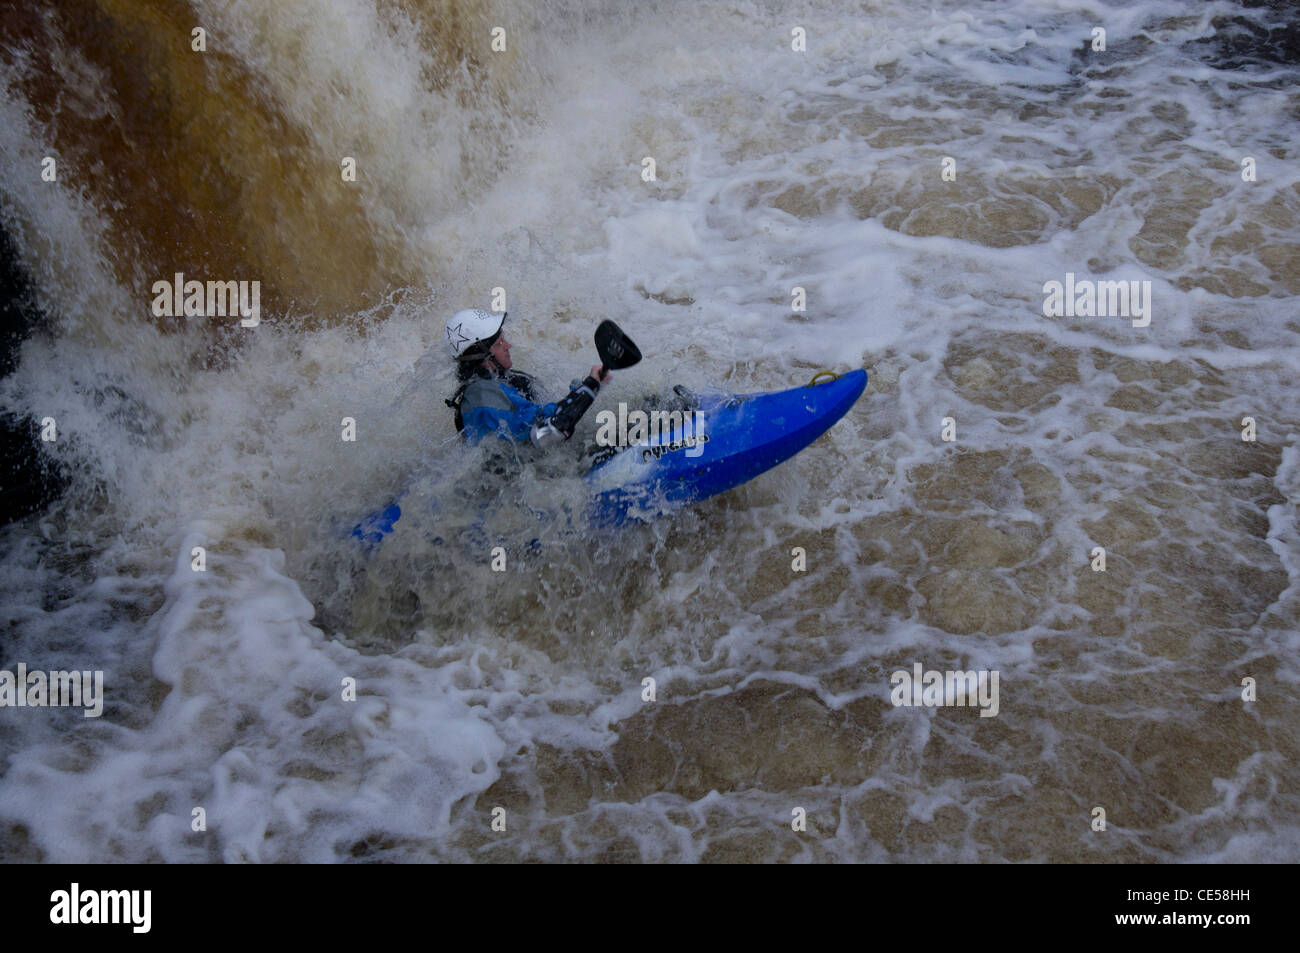 Kayaker on a waterfall in Teesdale, England Stock Photo